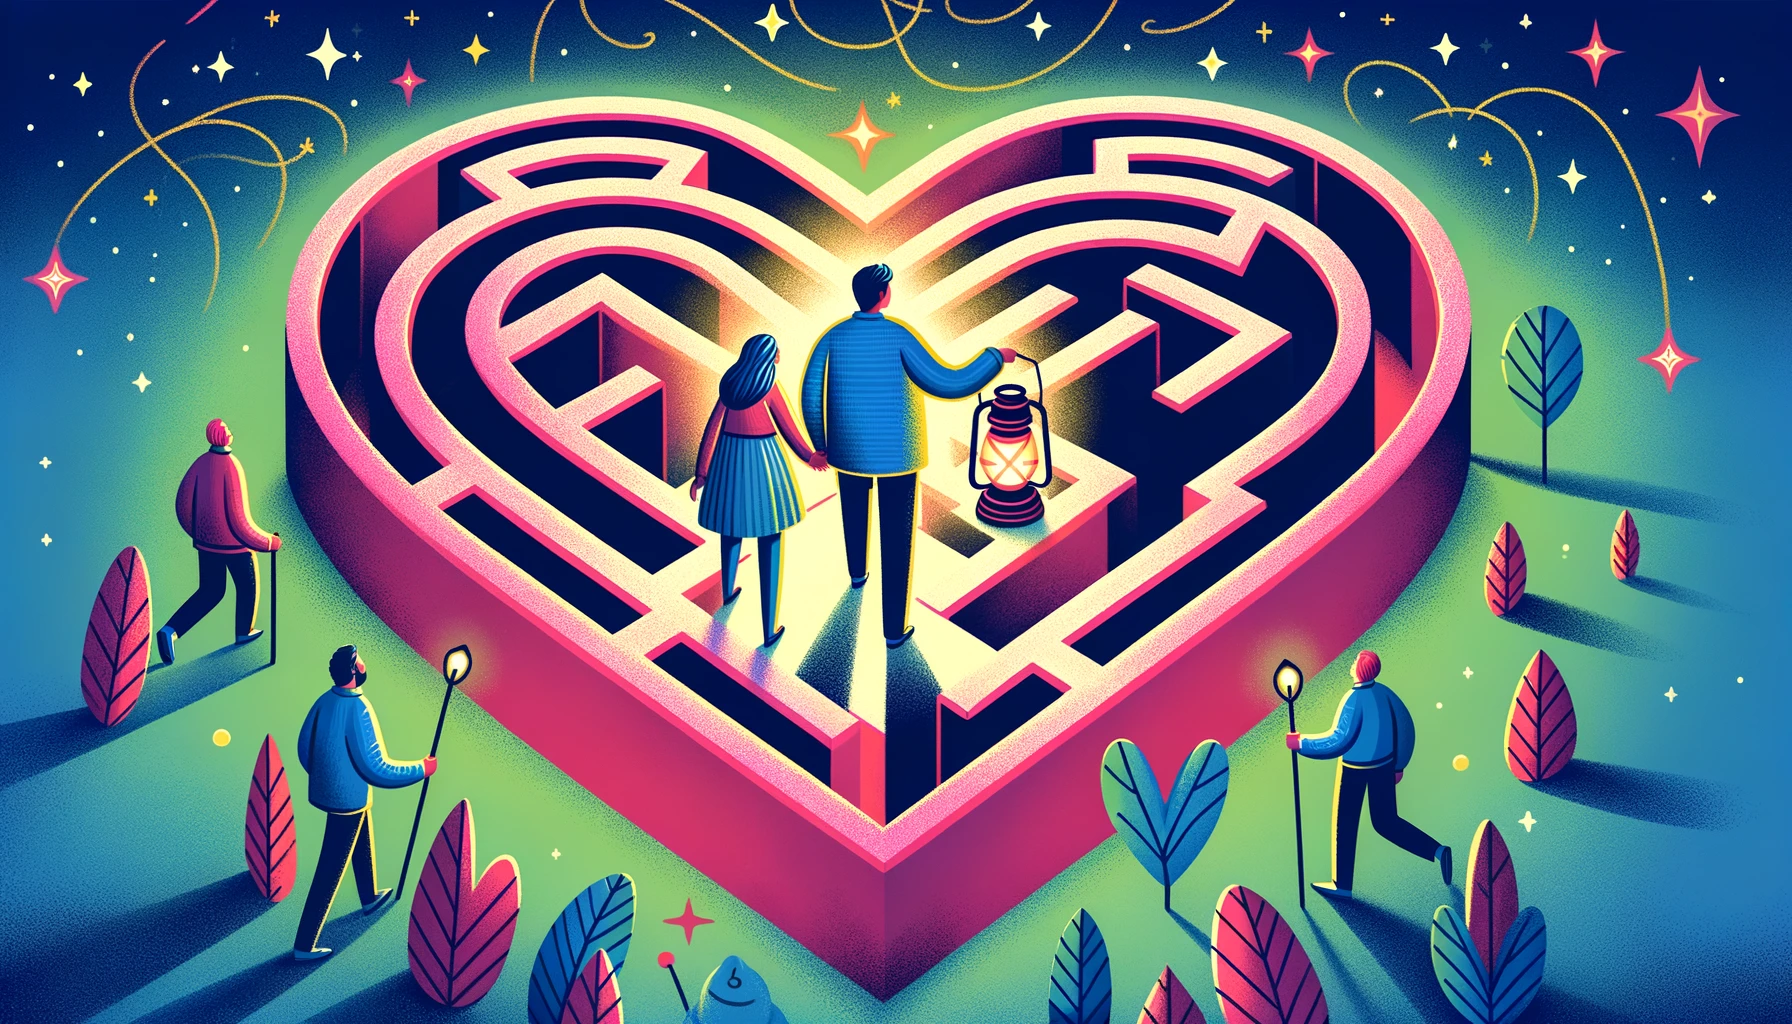 Couple navigating a heart-shaped maze together, symbolizing the journey of overcoming insecurities in a relationship